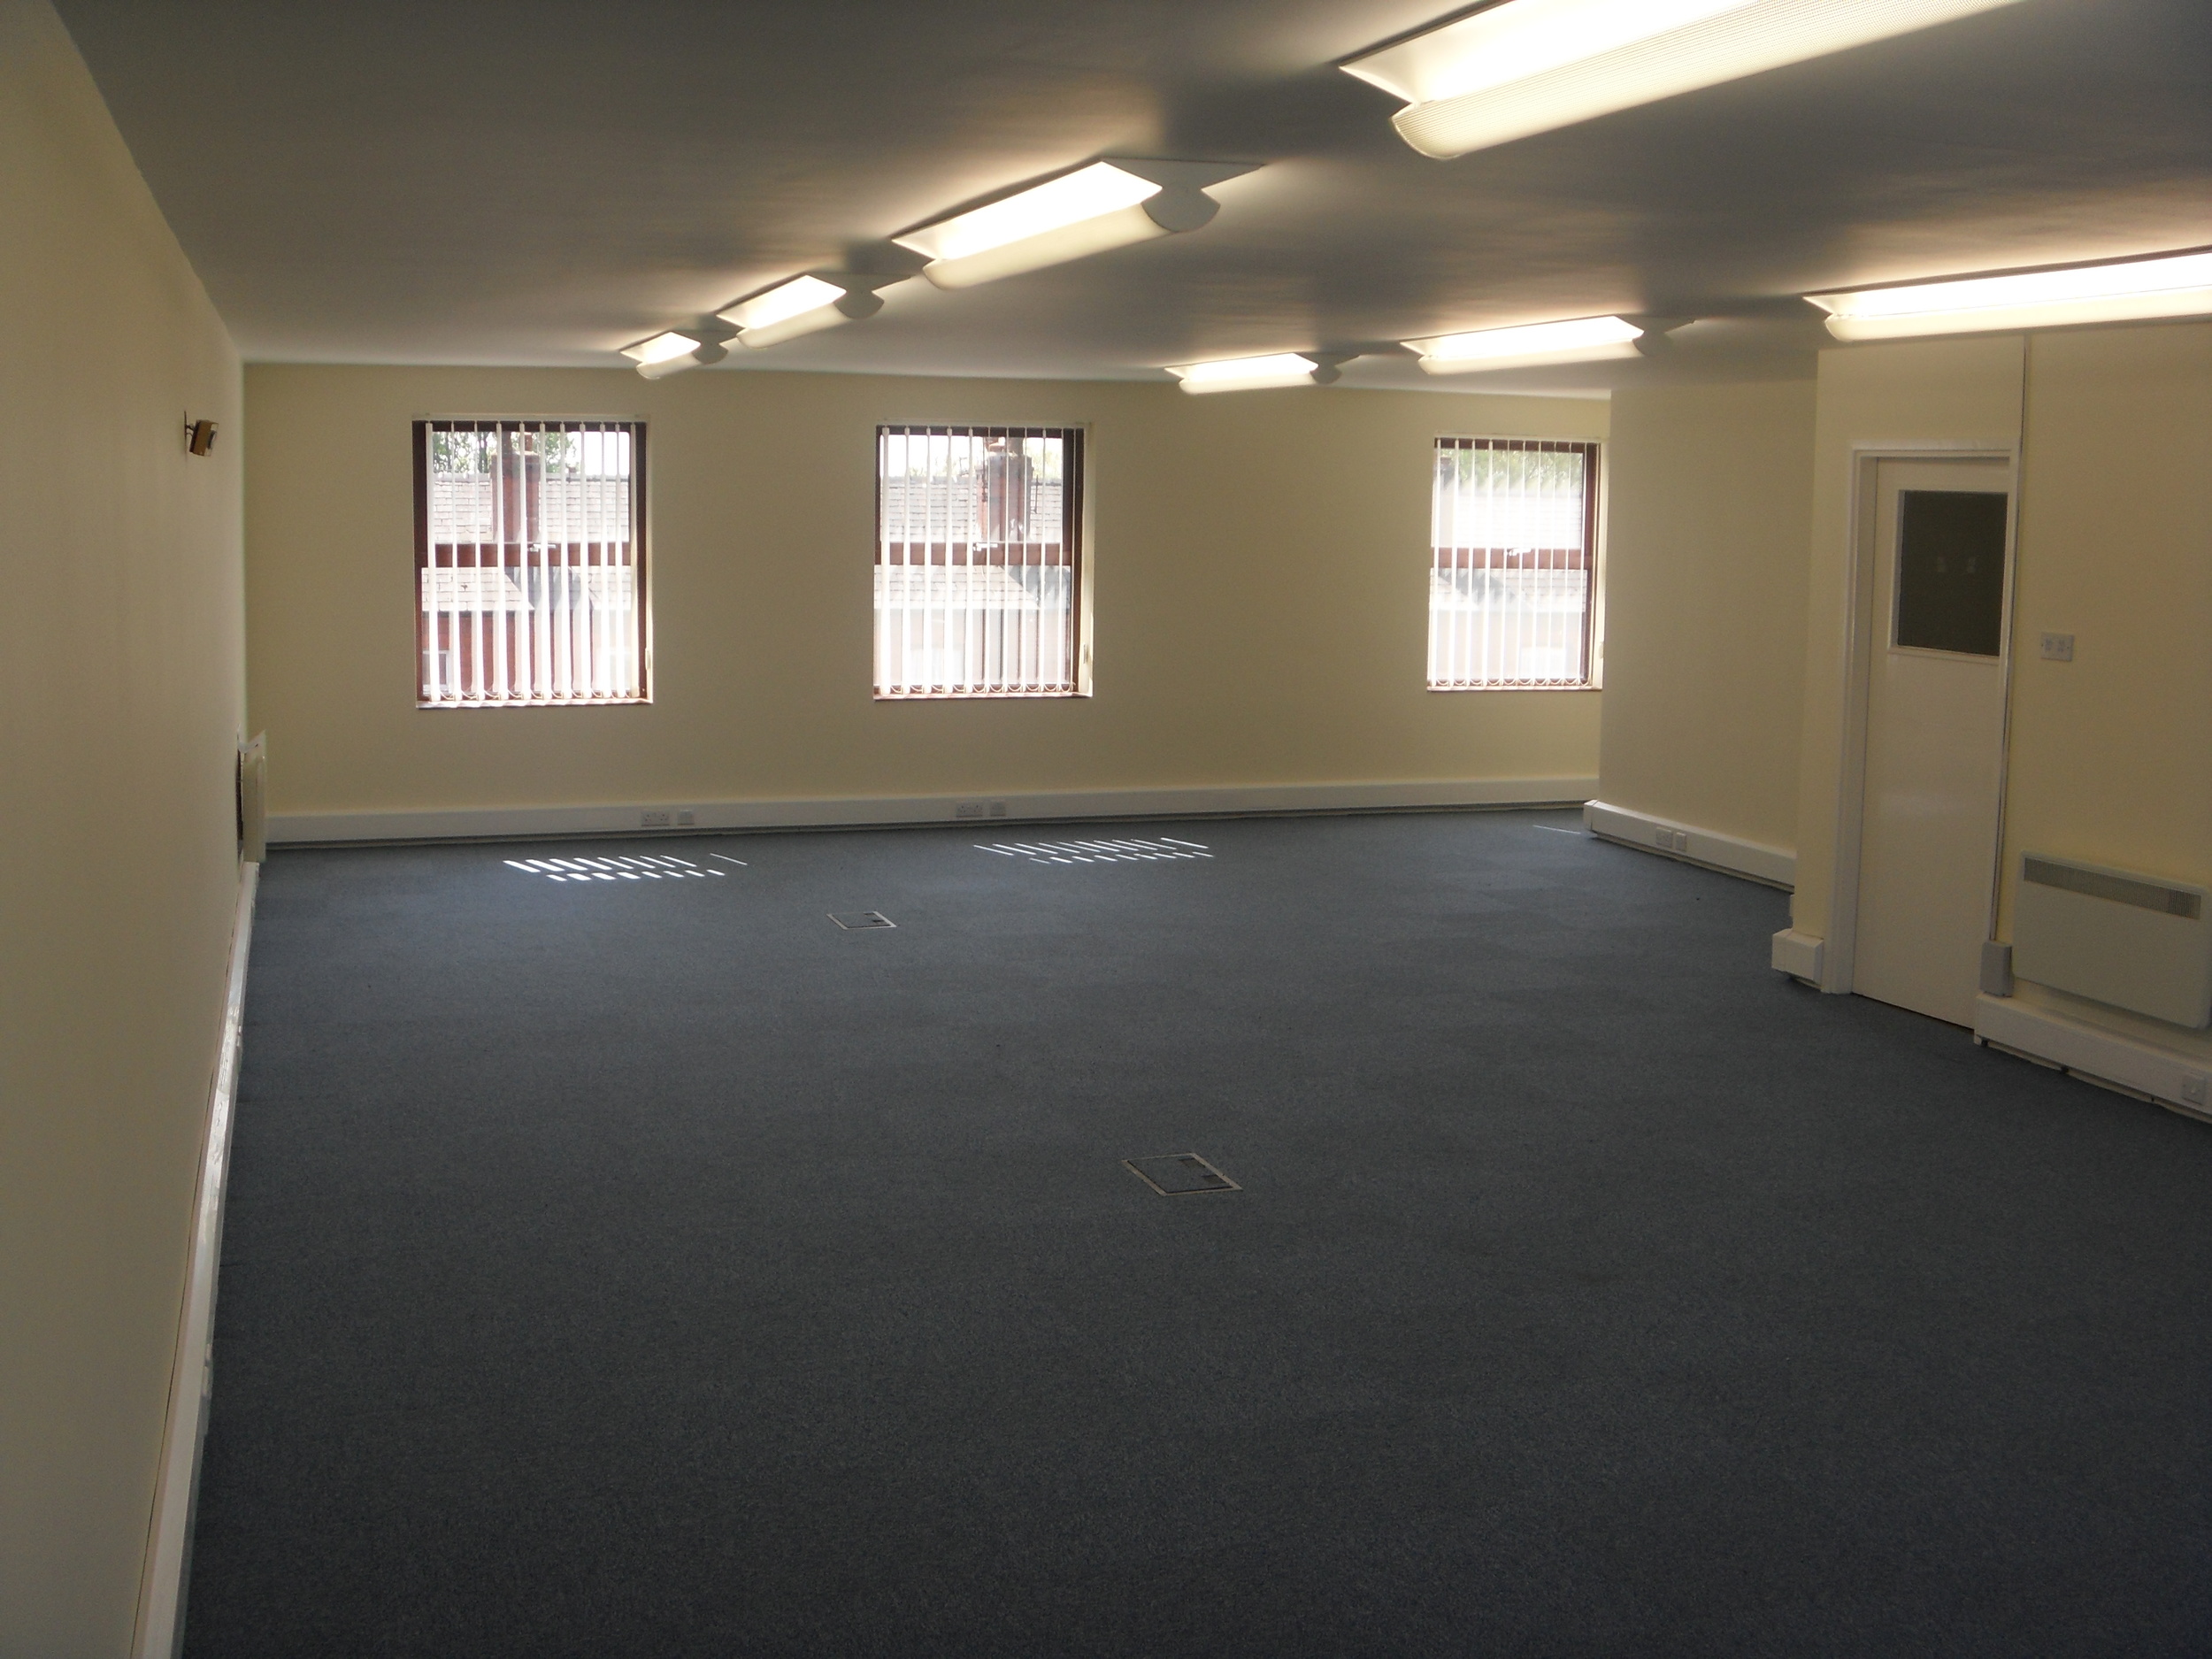   High Quality Offices   Walkden, Worsley near Manchester 